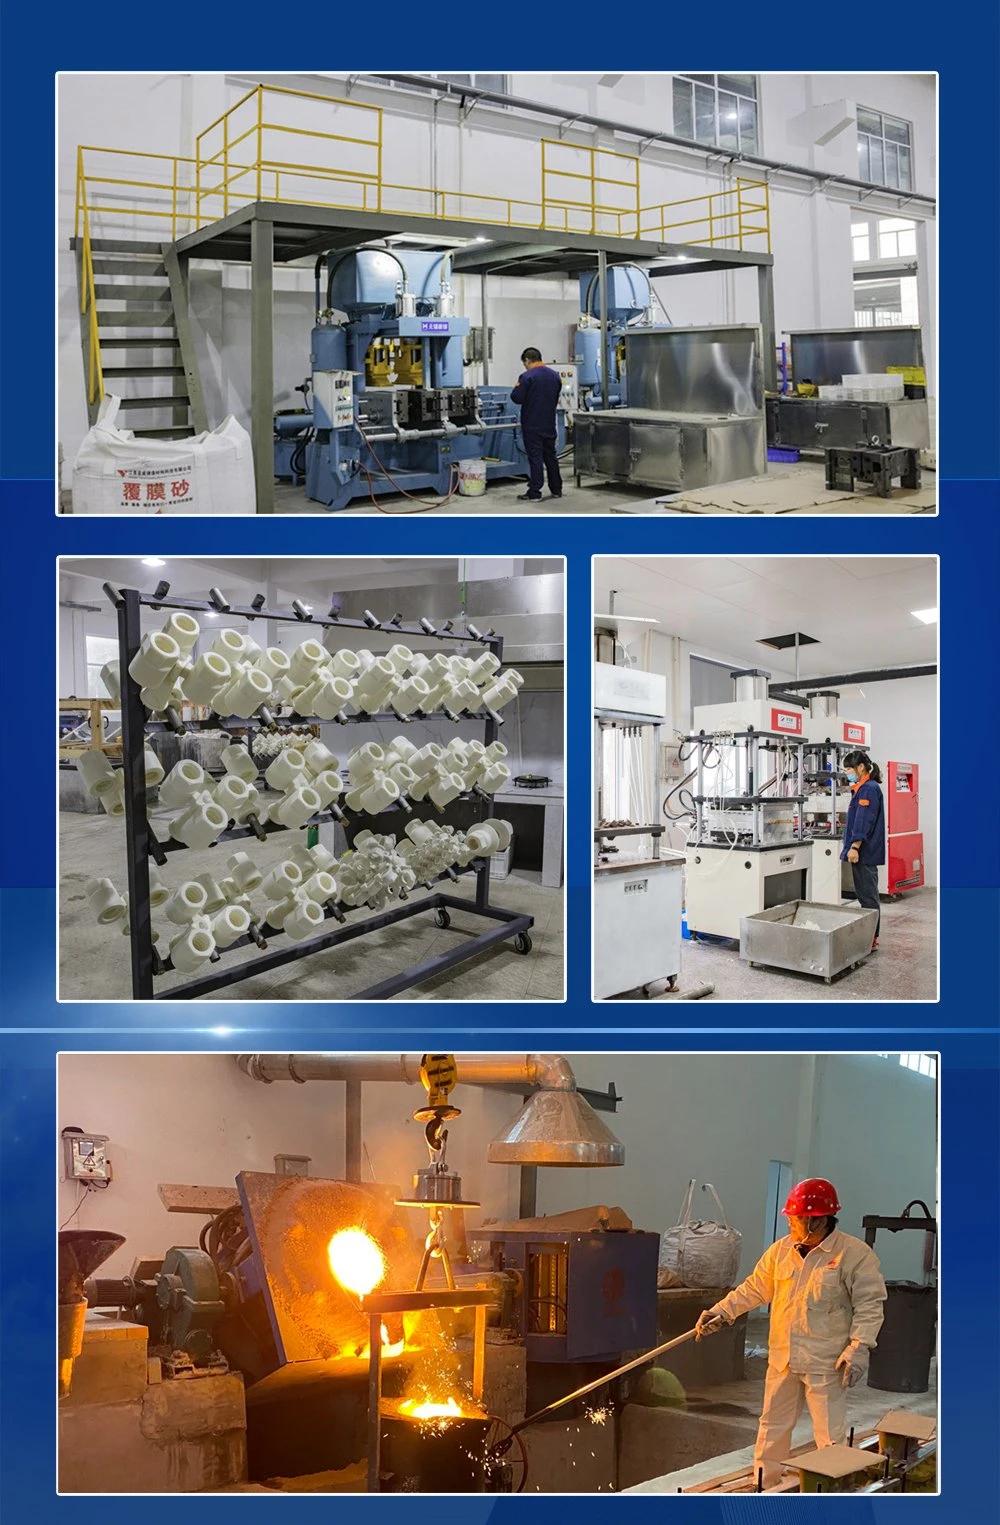 Machining,Accessories,Decoration,Company,Forging,Pressing,Mating Facility,Hydraulic,Pressure,Pumping,Decoration,Lighting,Warehouse,Basement,Power Fitting,Bus